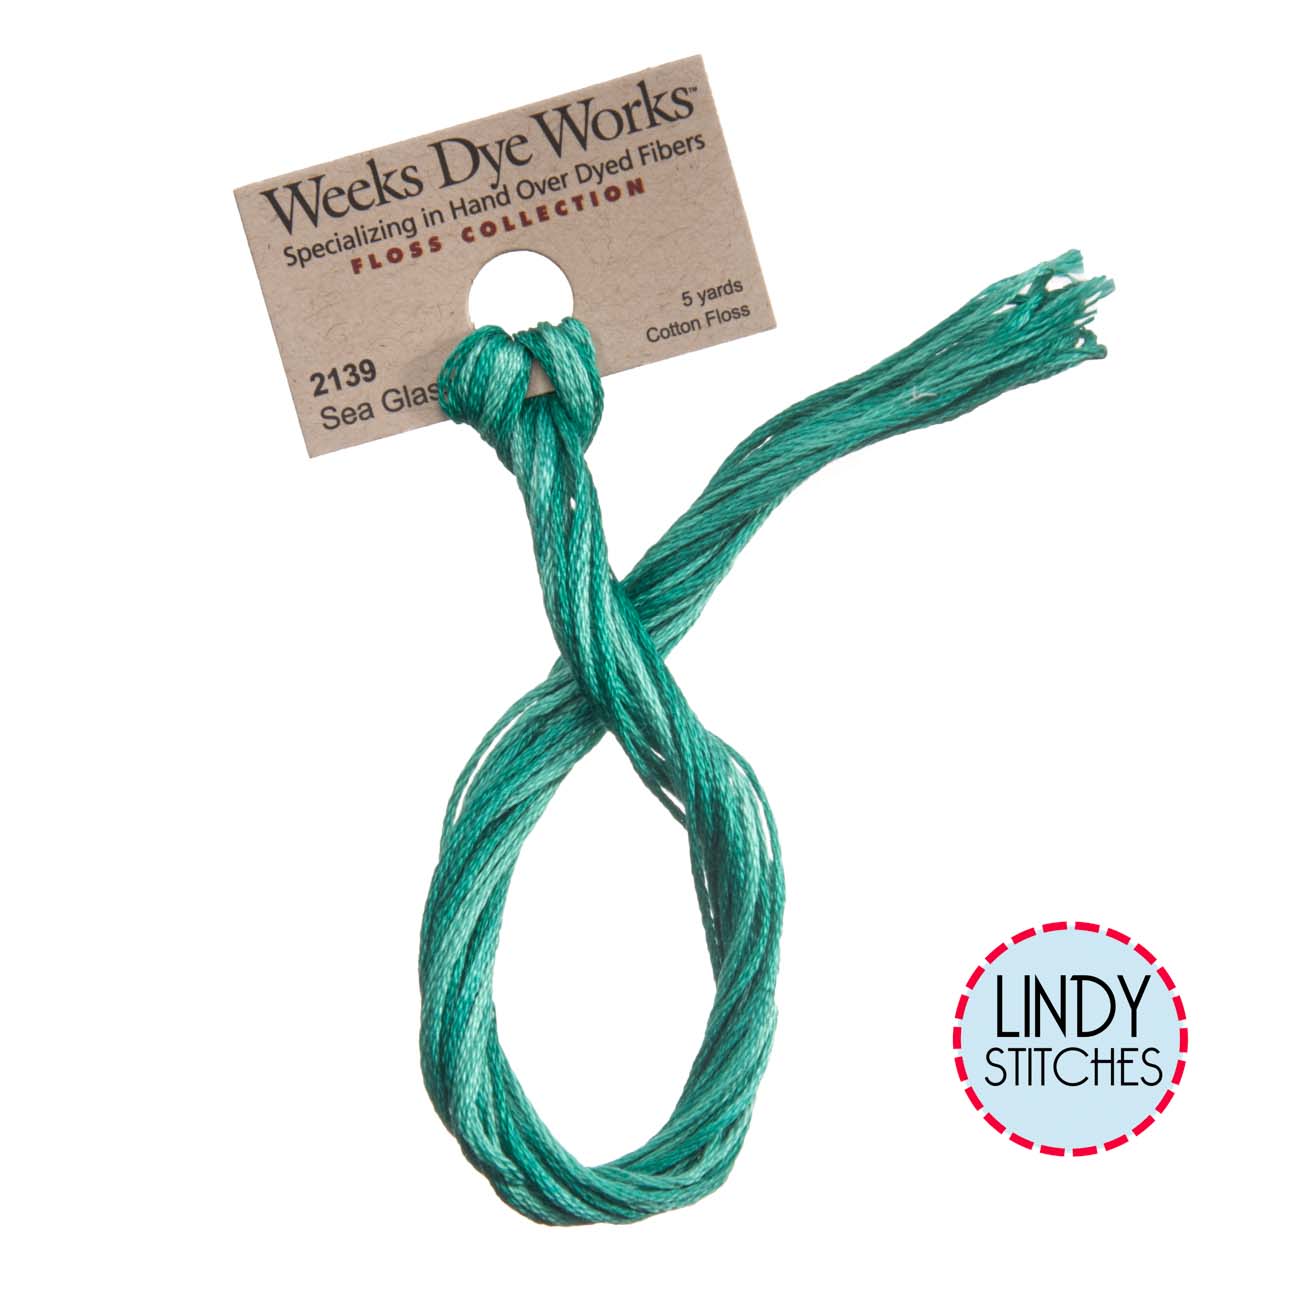 Sea Glass Weeks Dye Works Floss Hand Dyed Cotton Skein 2139